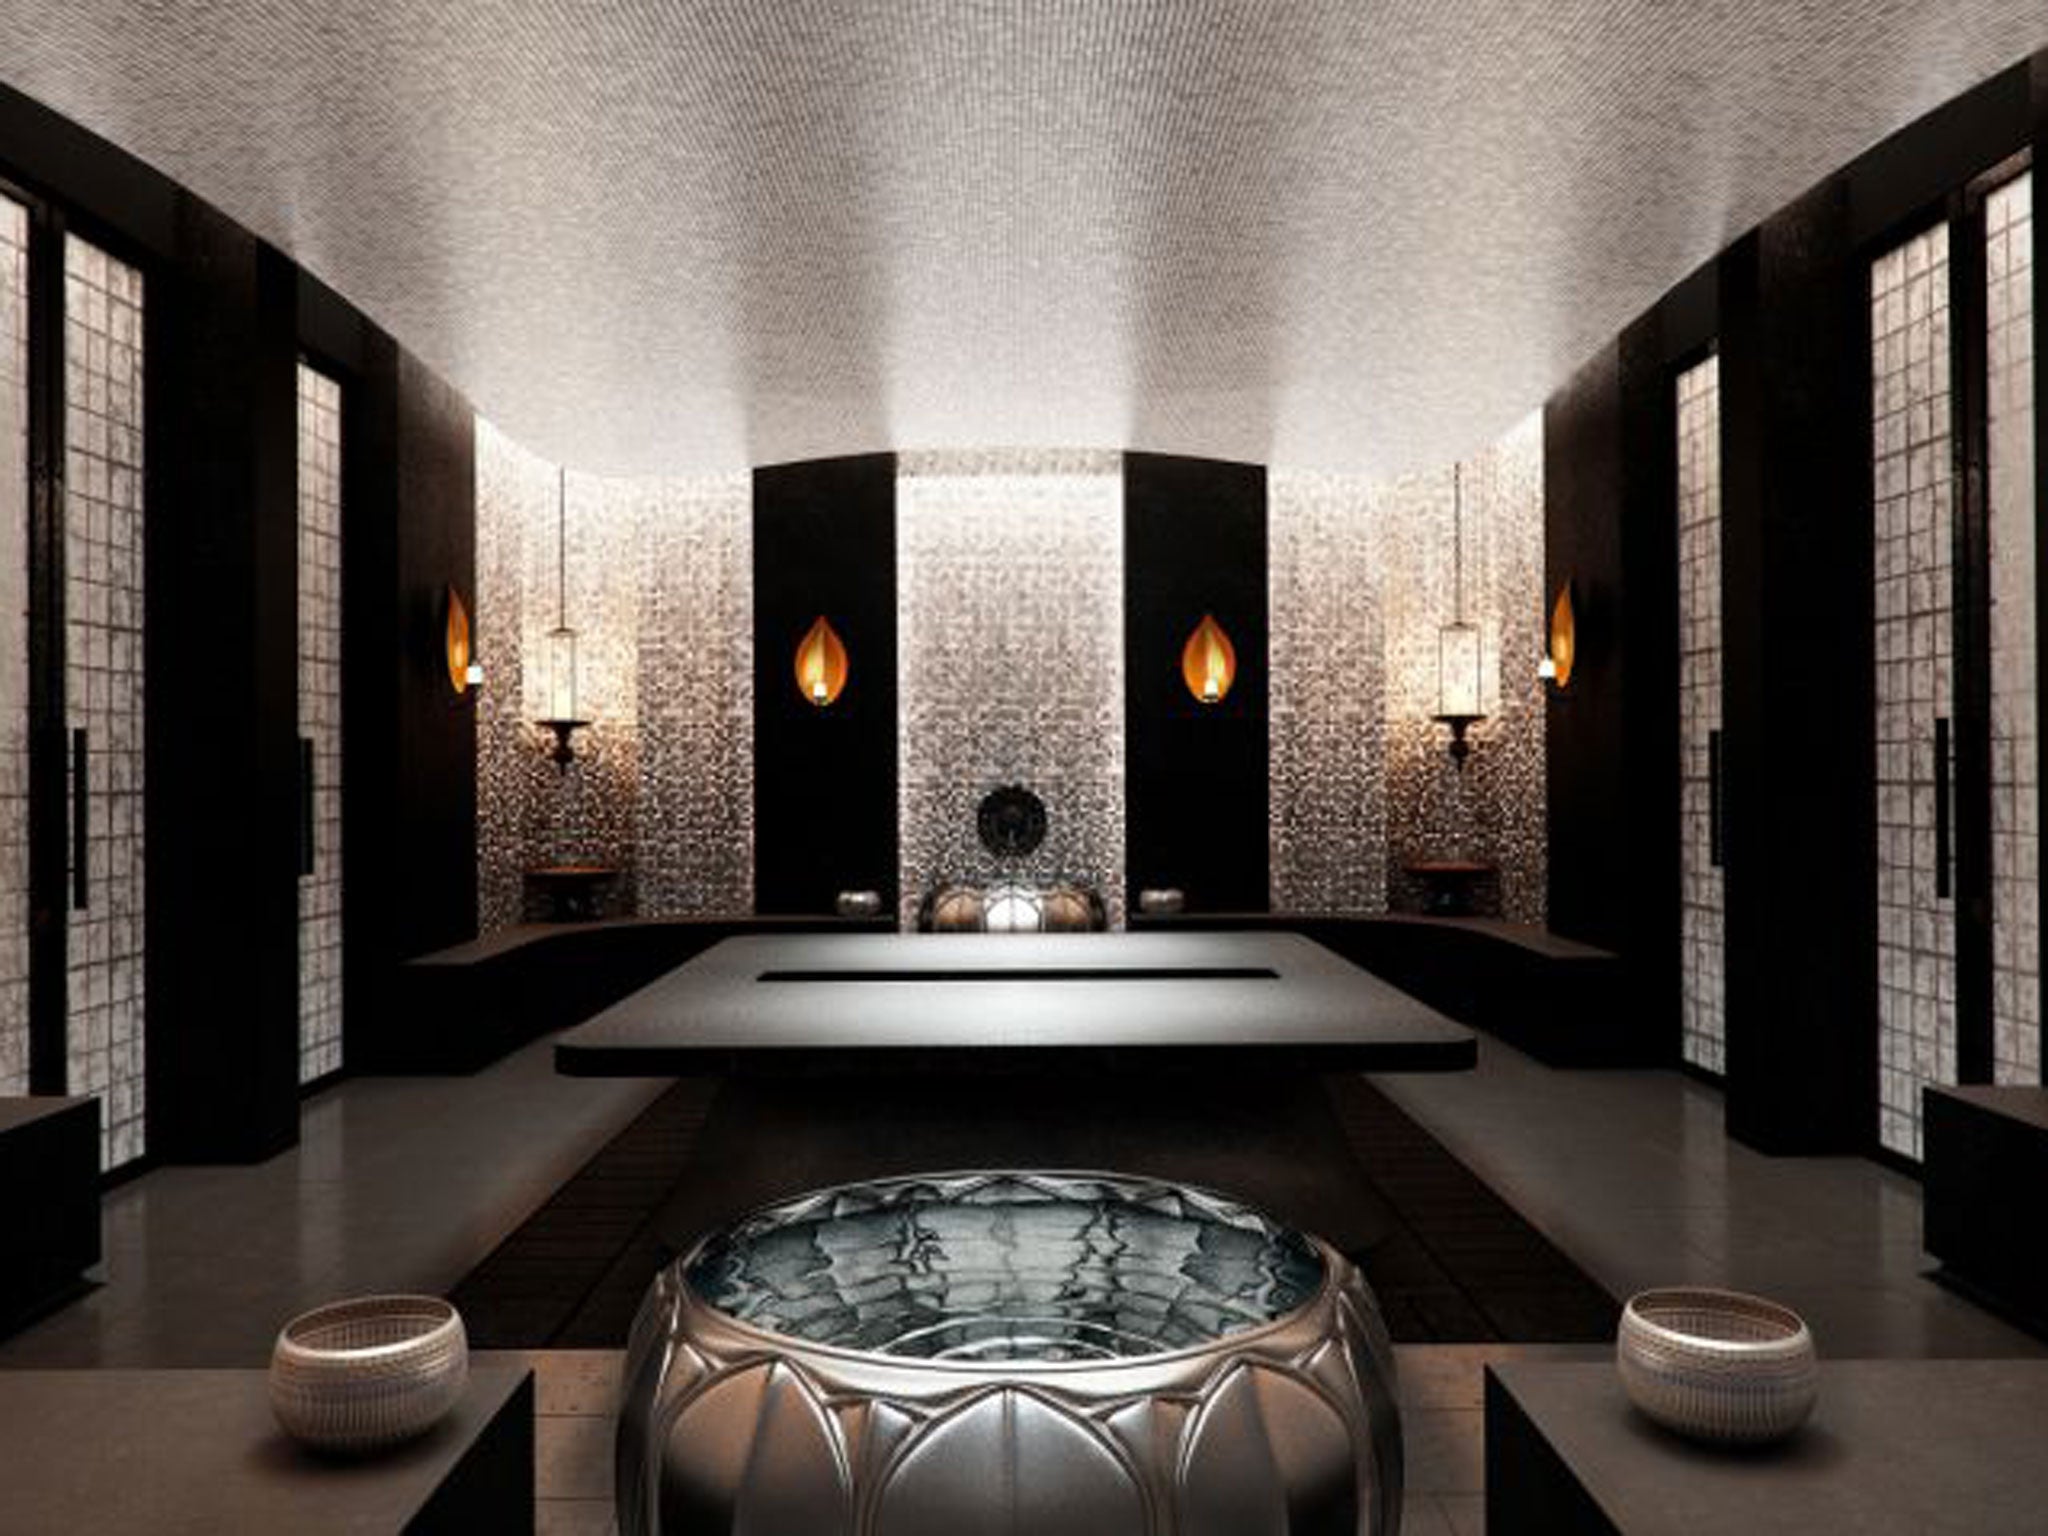 And ... relax: the Siam Spa